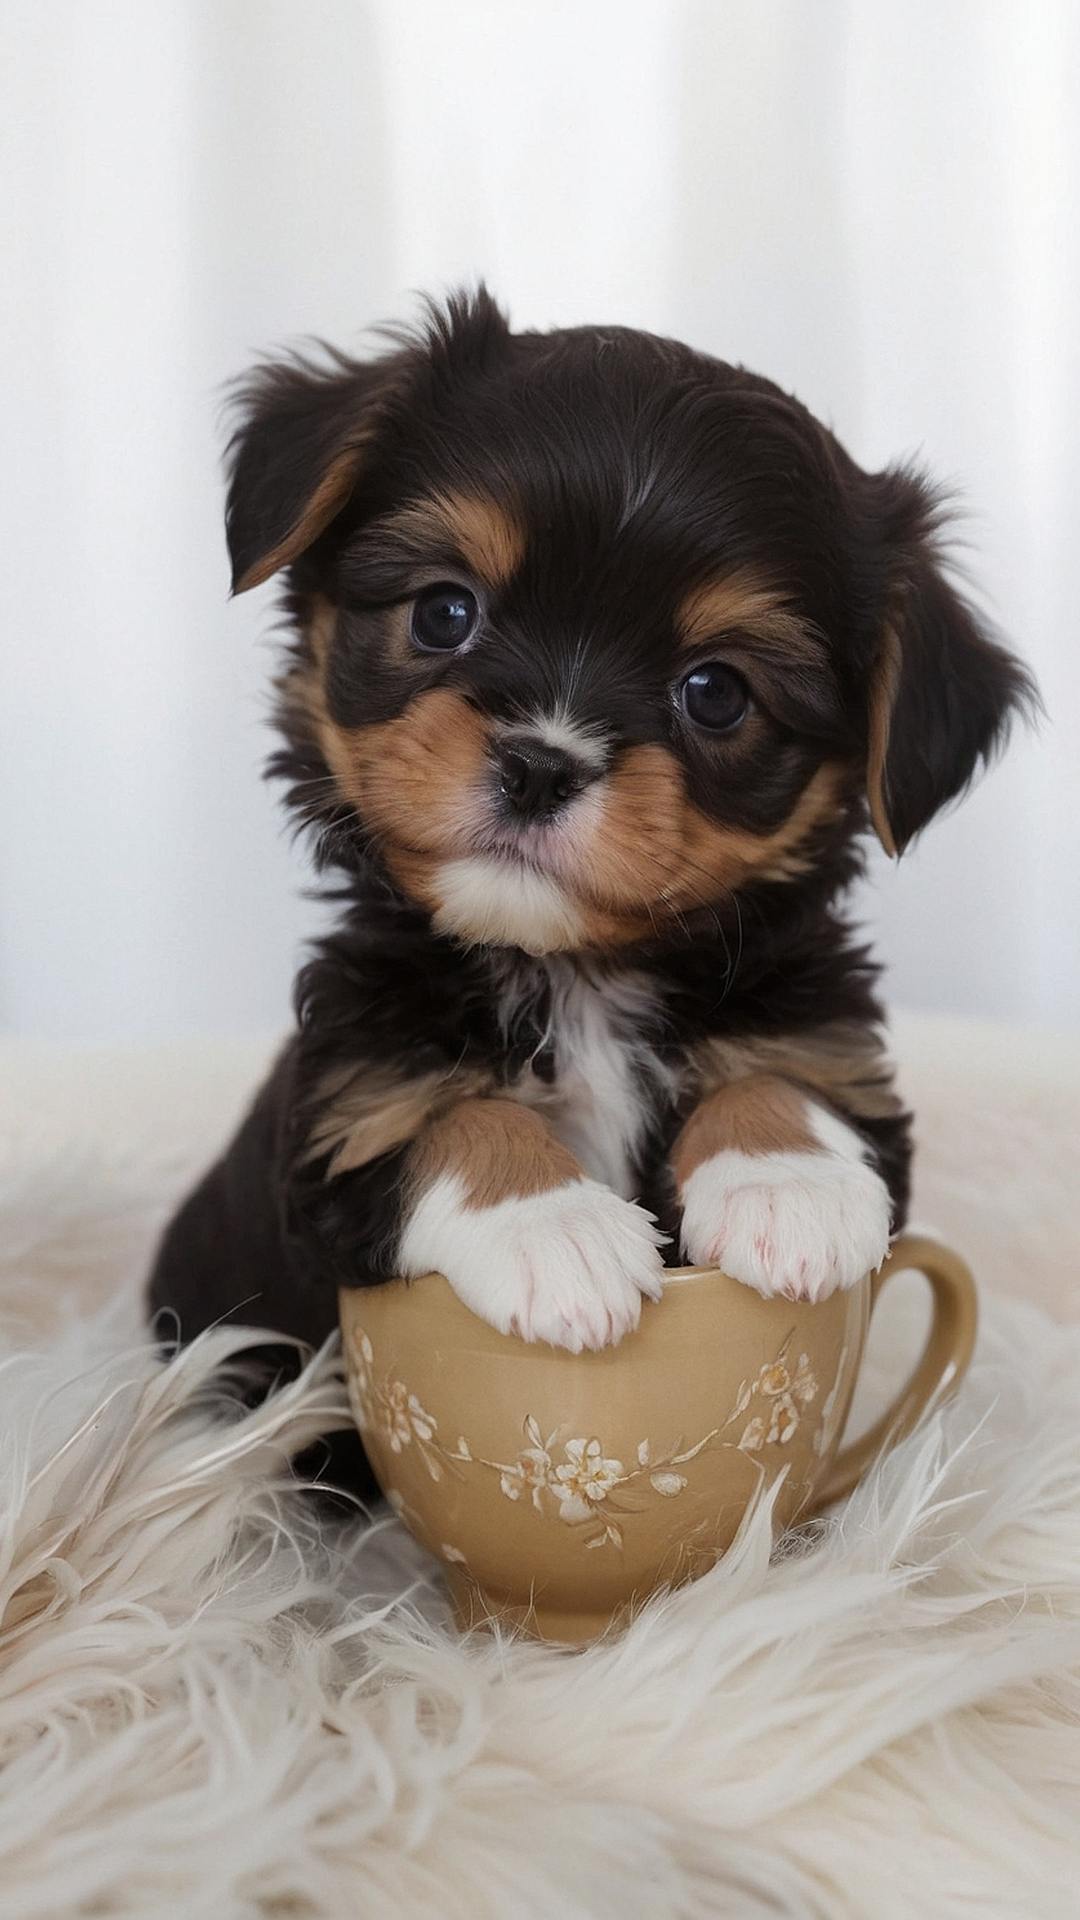 Lovable Little Pooches: Teacup Puppies Display